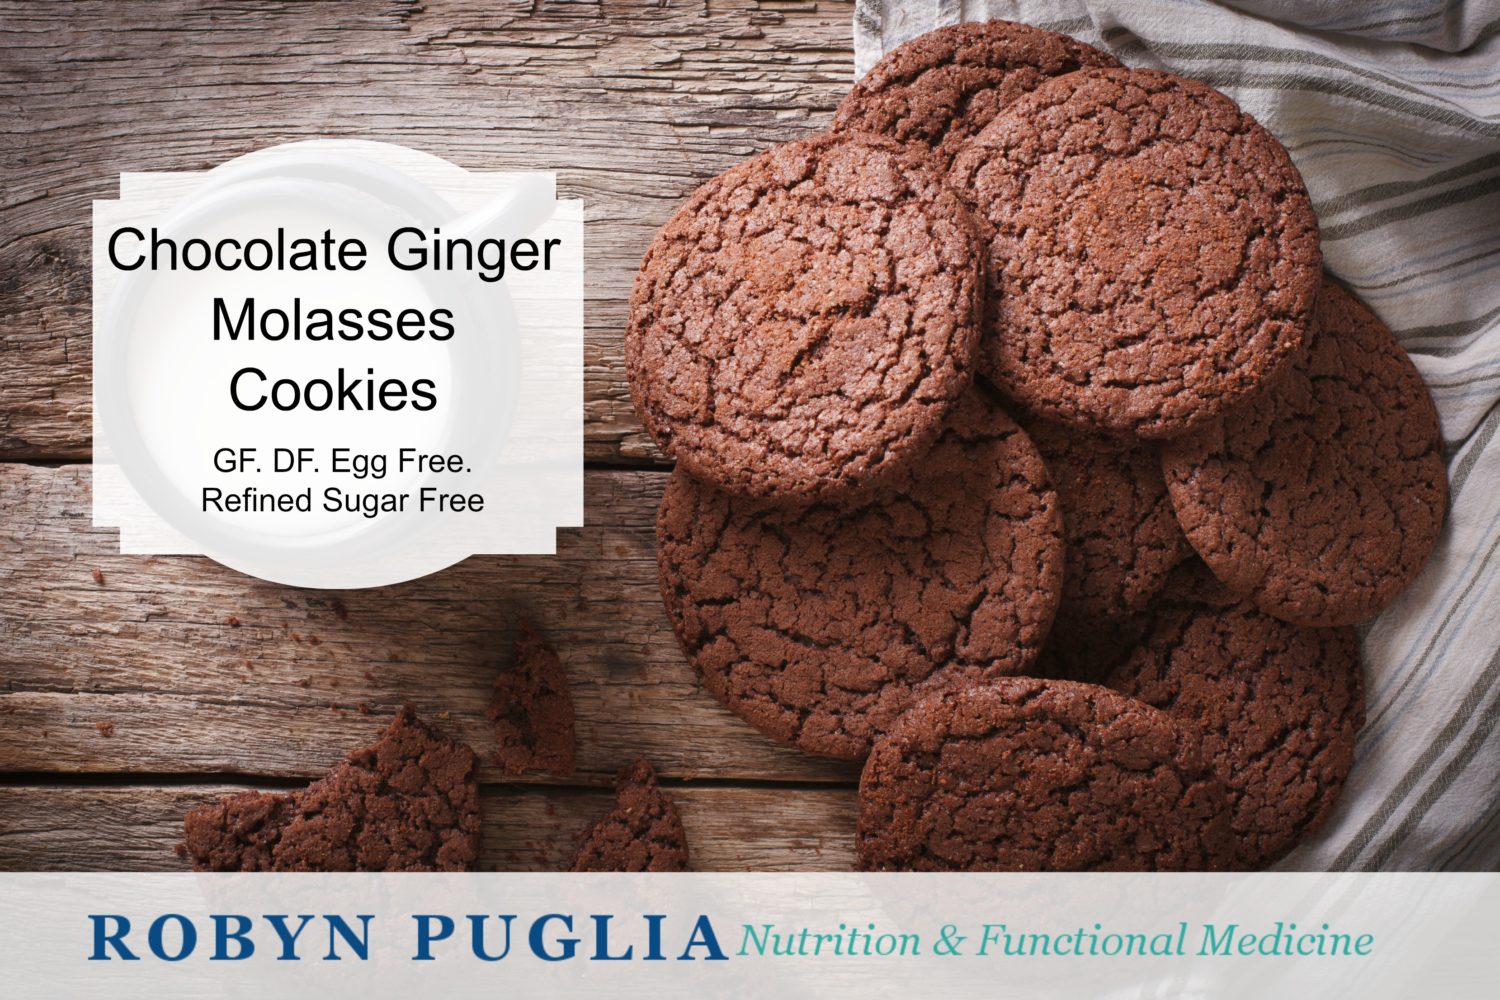 Chocolate ginger molasses cookies